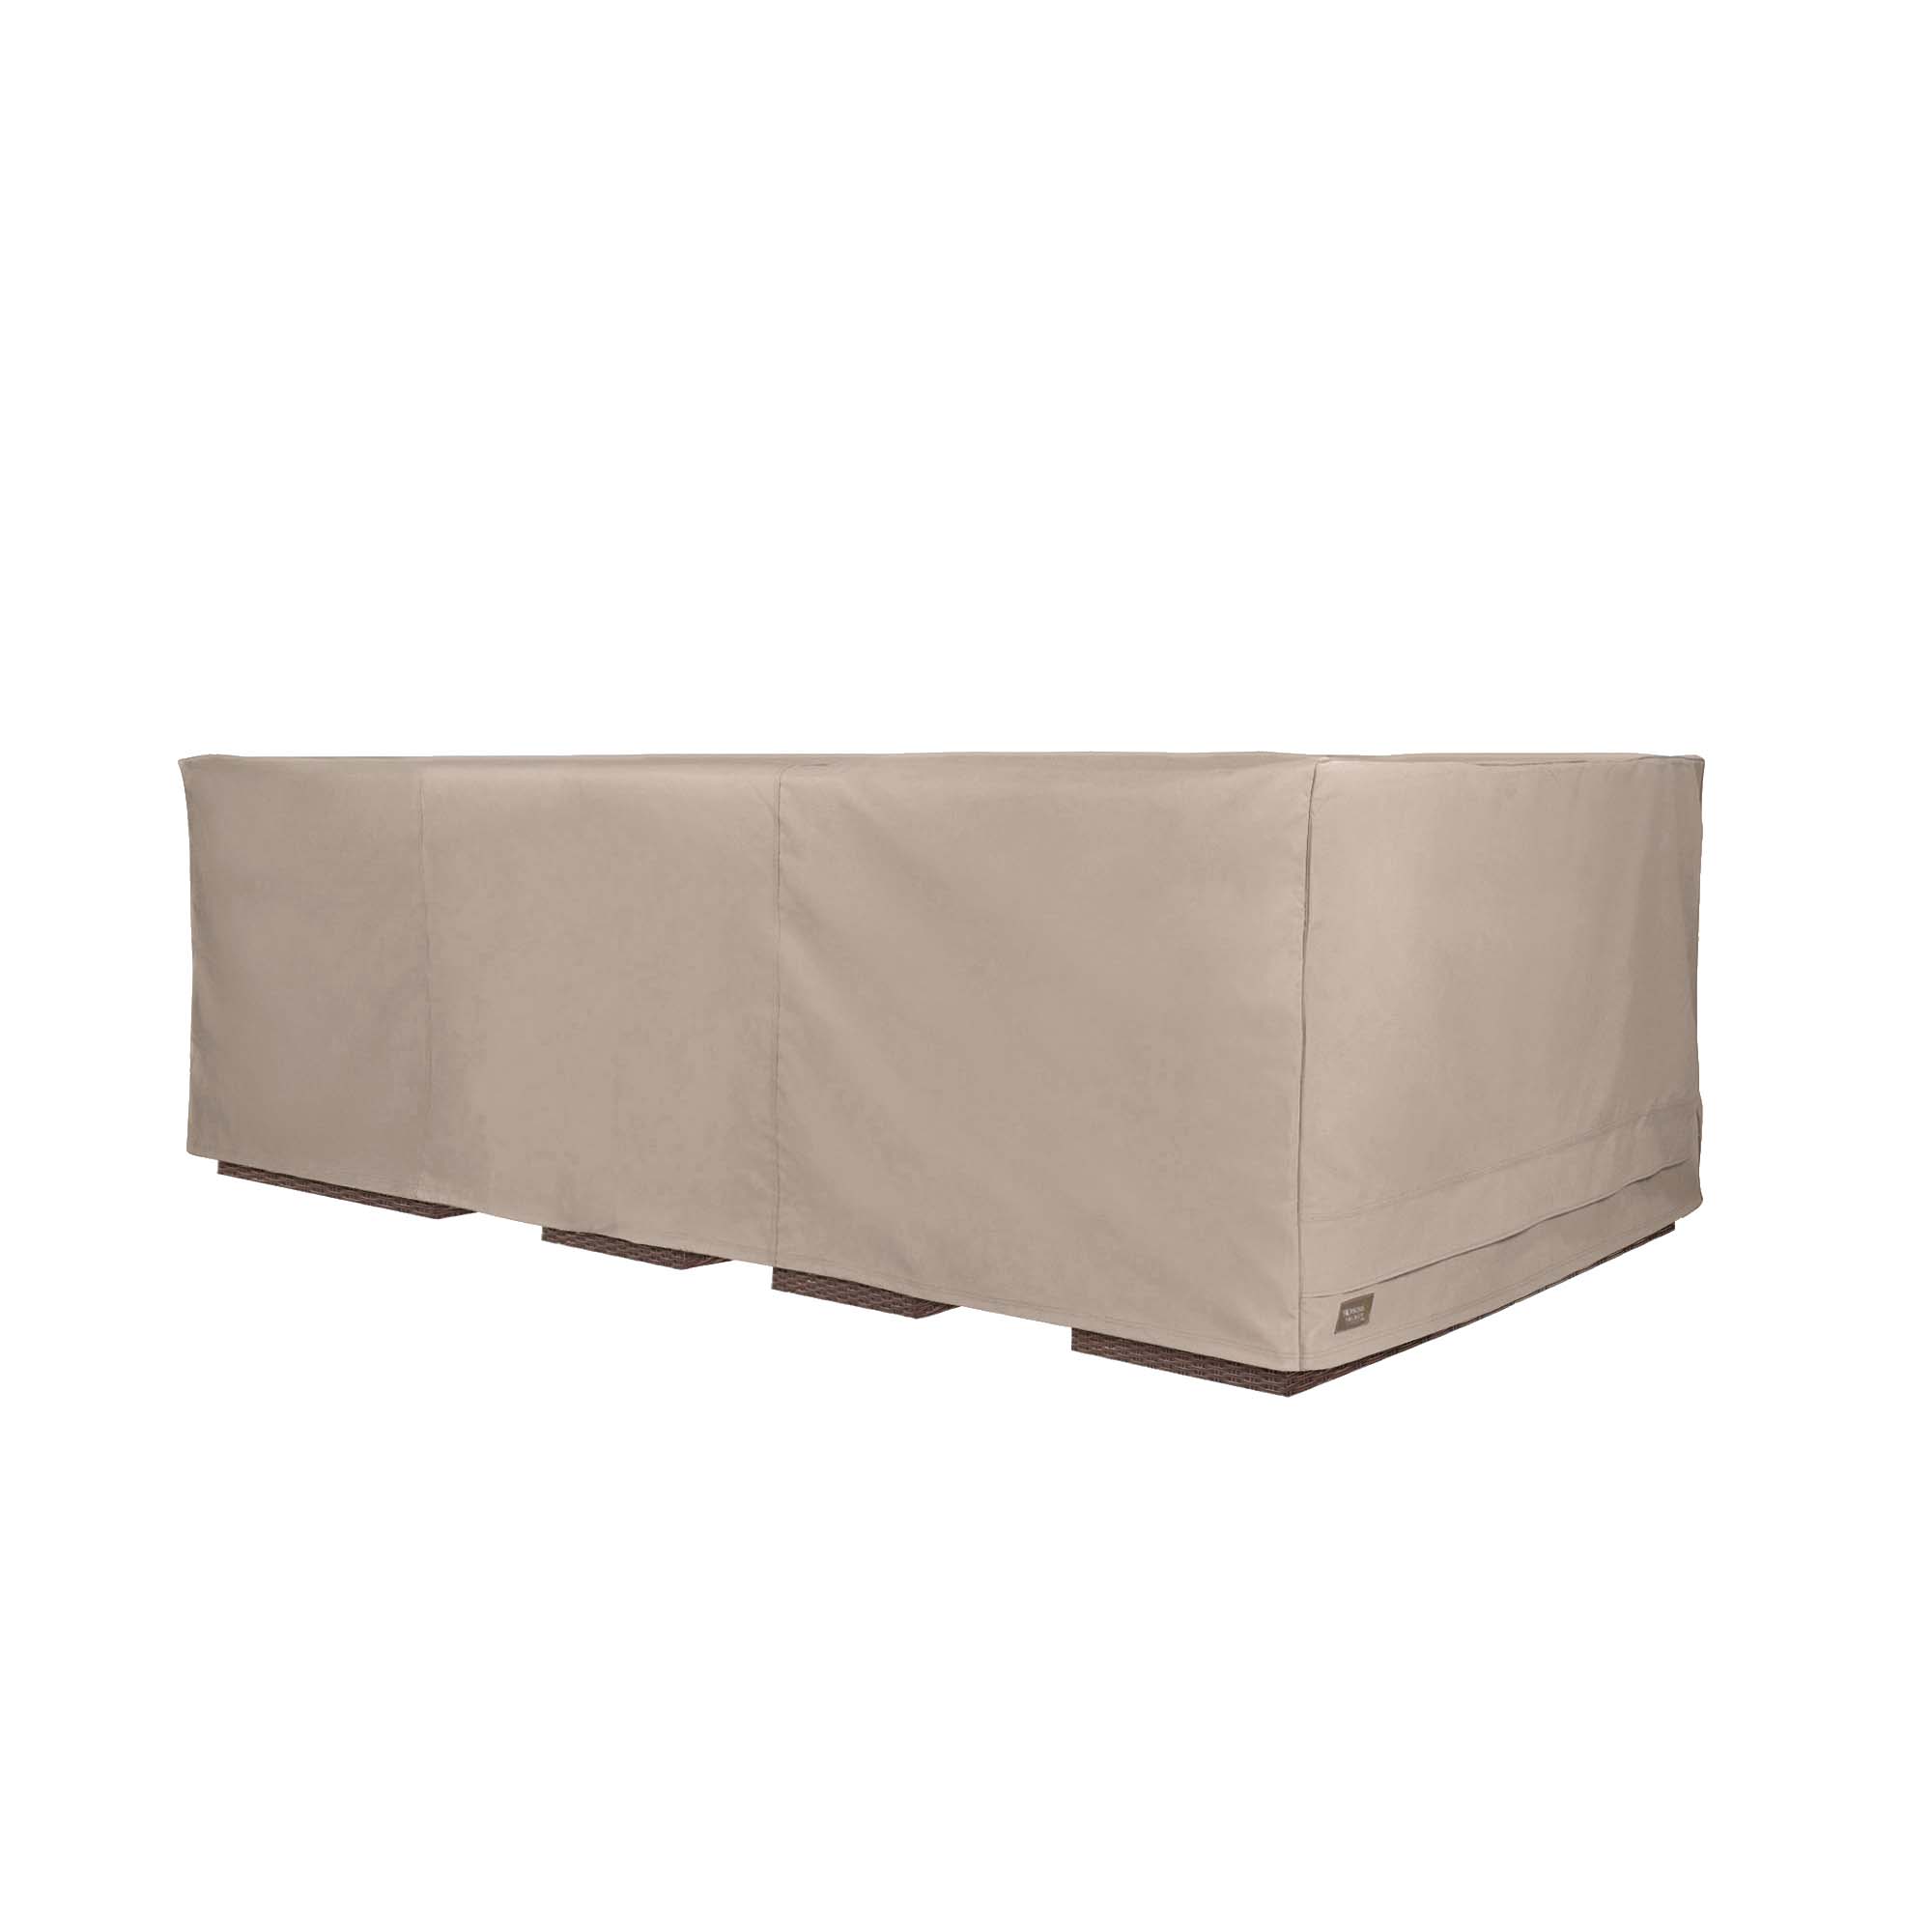 Patio Chat Set Furniture Cover